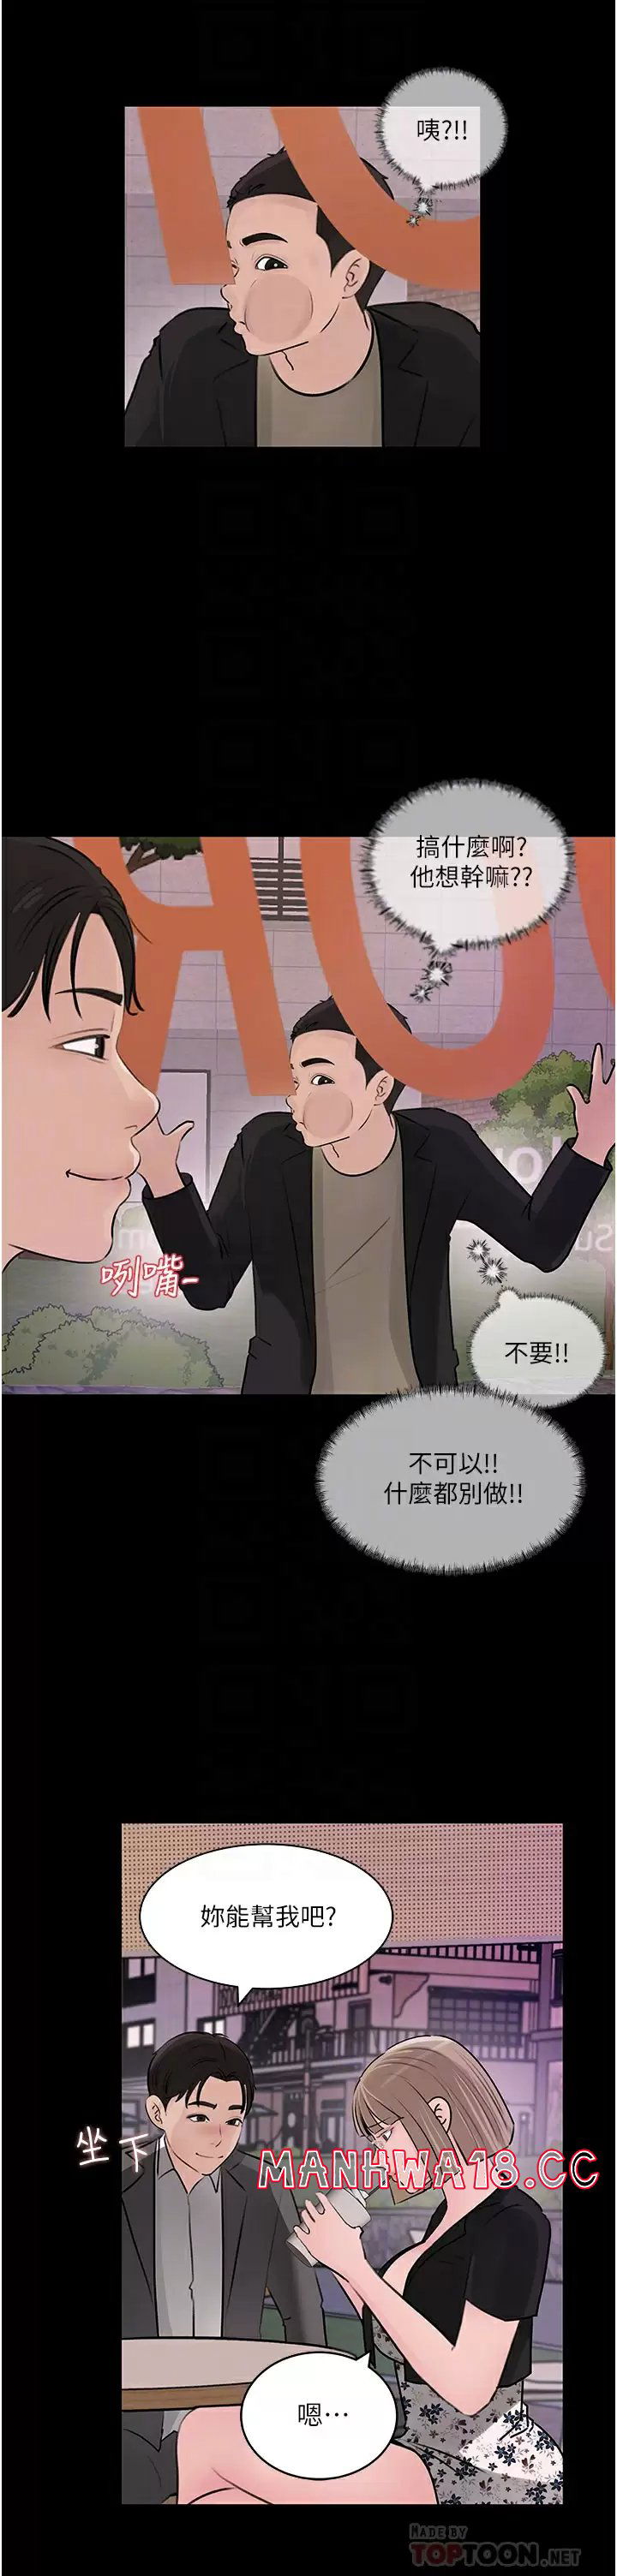 in-my-sister-in-law-raw-chap-32-5